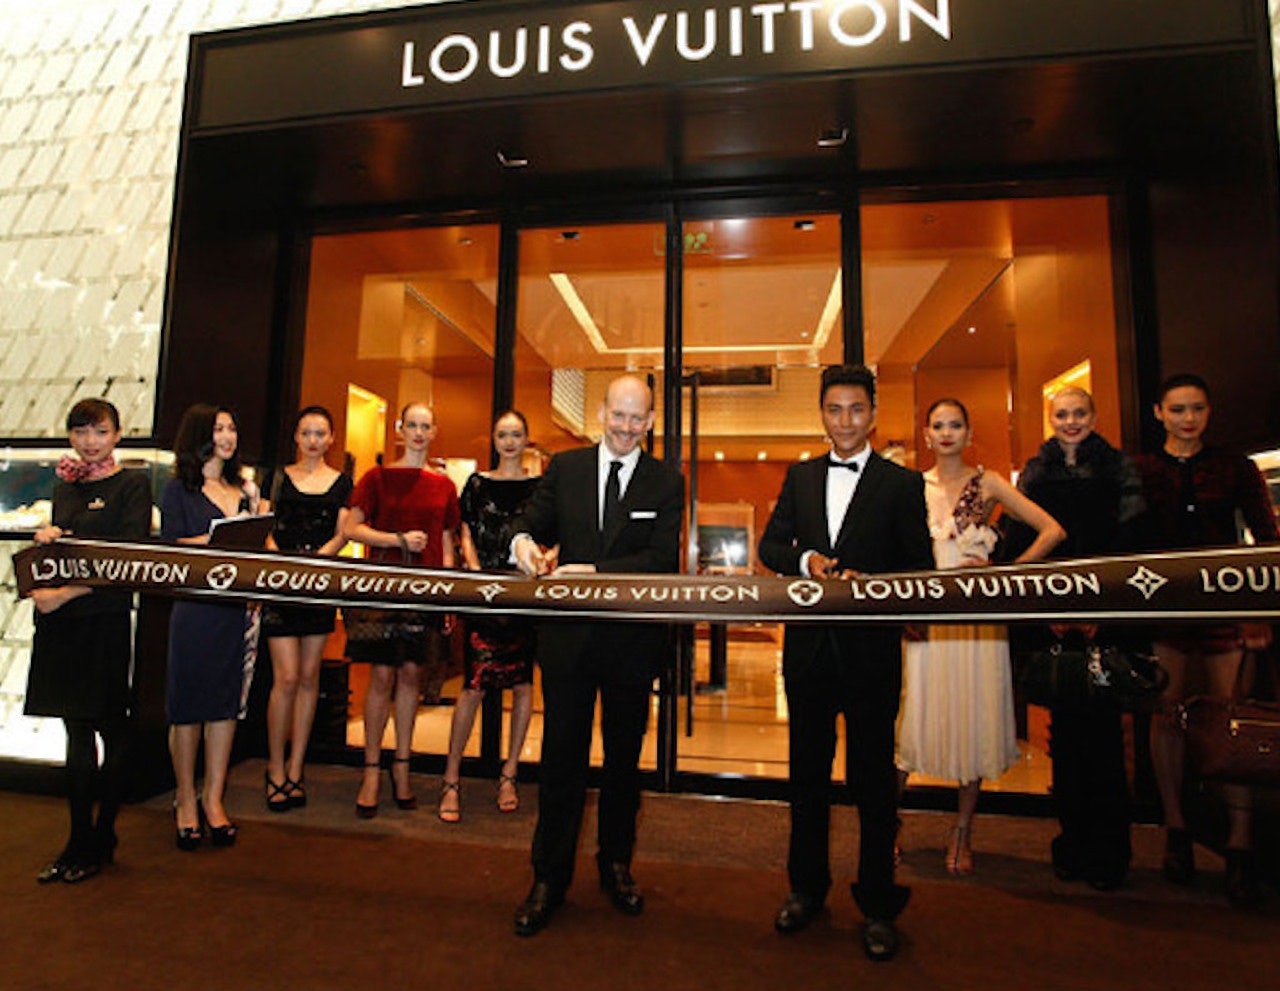 Louis Vuitton's new store opening at Chongqing, China. (Image via Louis Vuitton's official Weibo)